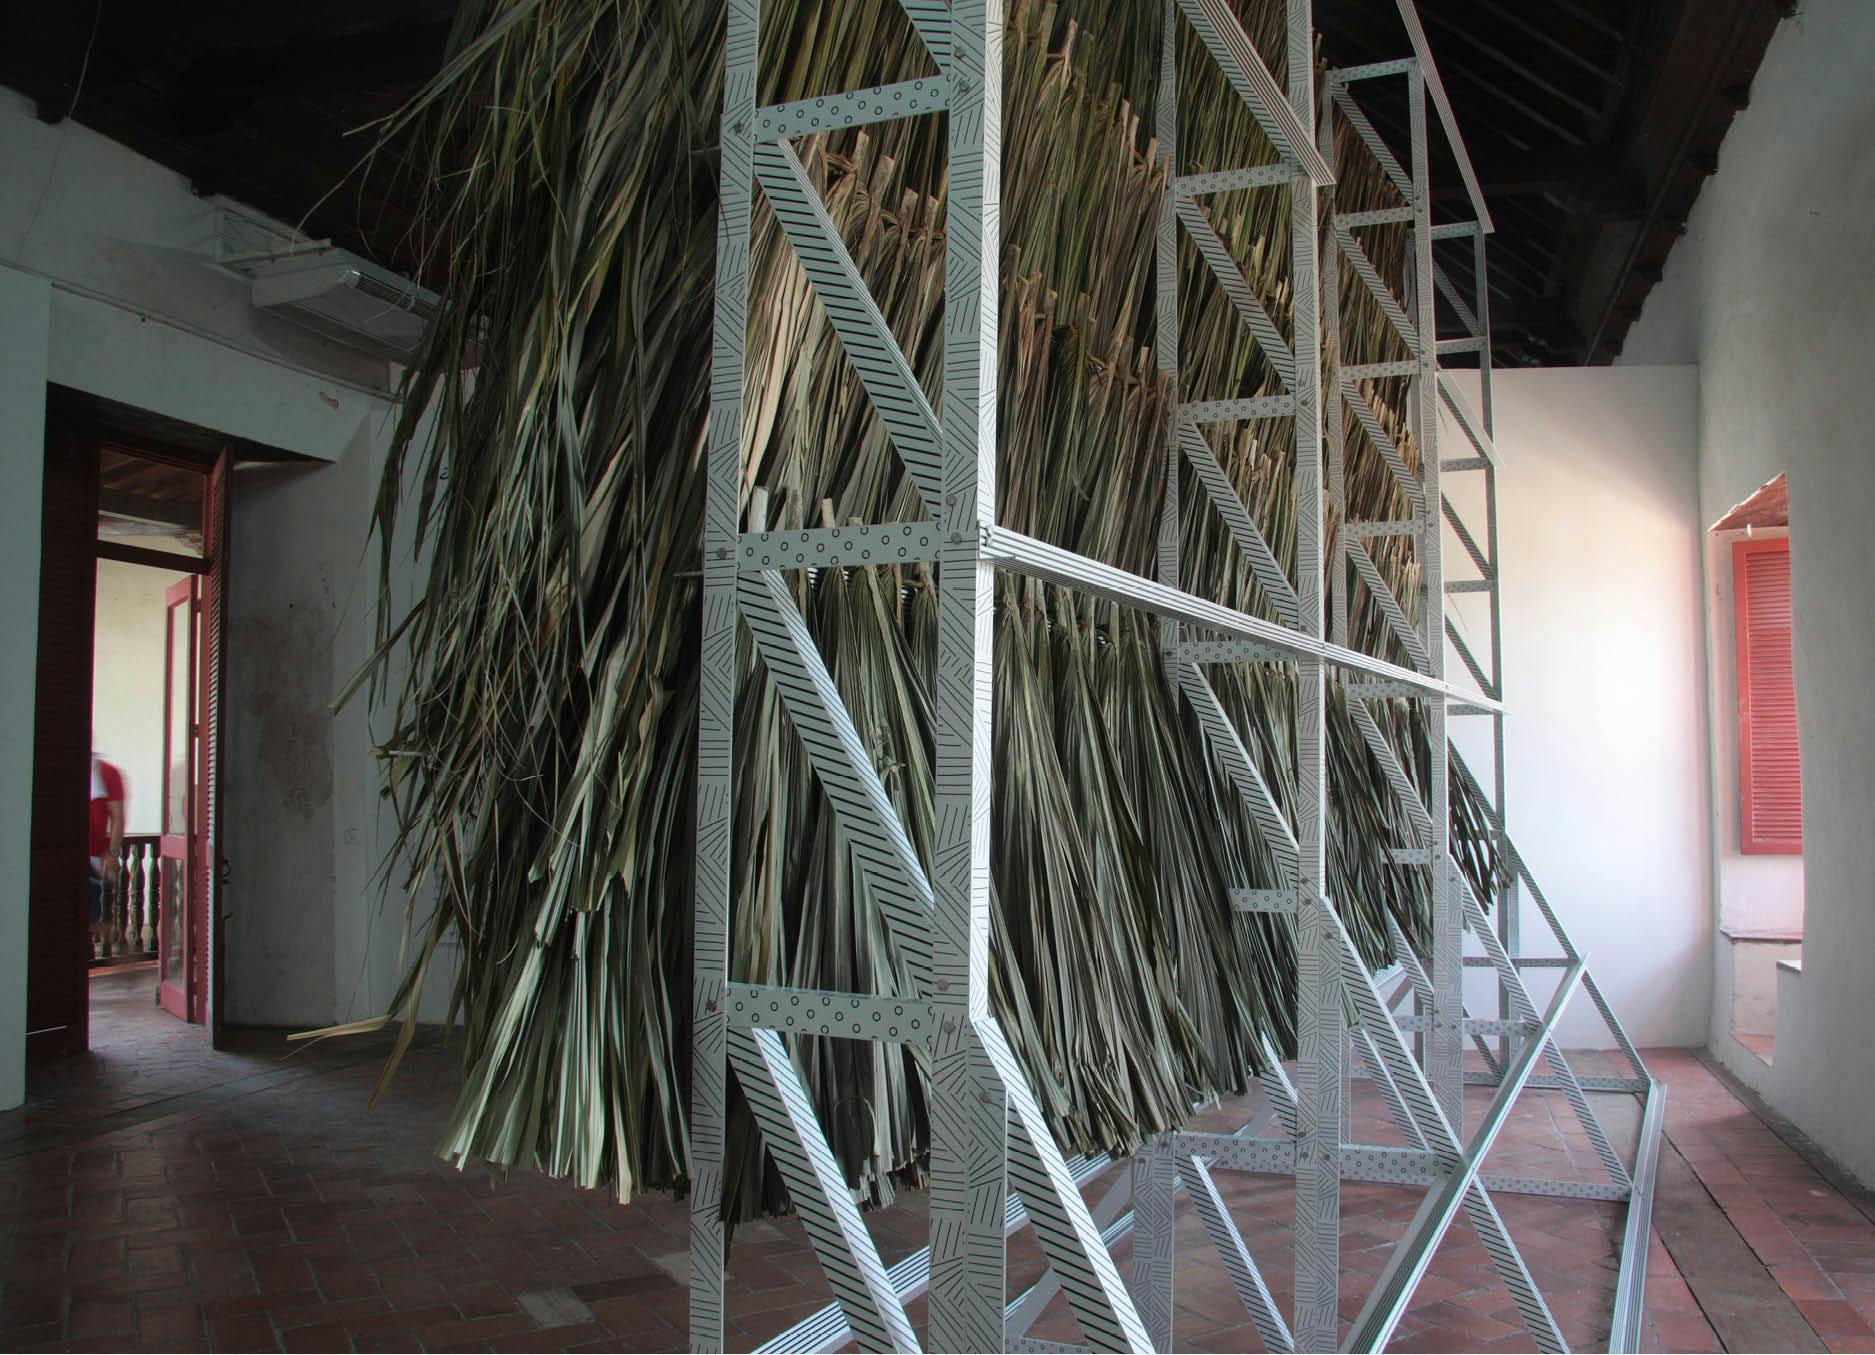 Decorated structure (productive public) by artist Henry Coleman, produced for Salon nacional de Artistas, Cartagena, Colombia, Close up Rear view of large wall of palapa thatch mounted onto white frame with intricate vinyl decoration frame on a simple tiled floor